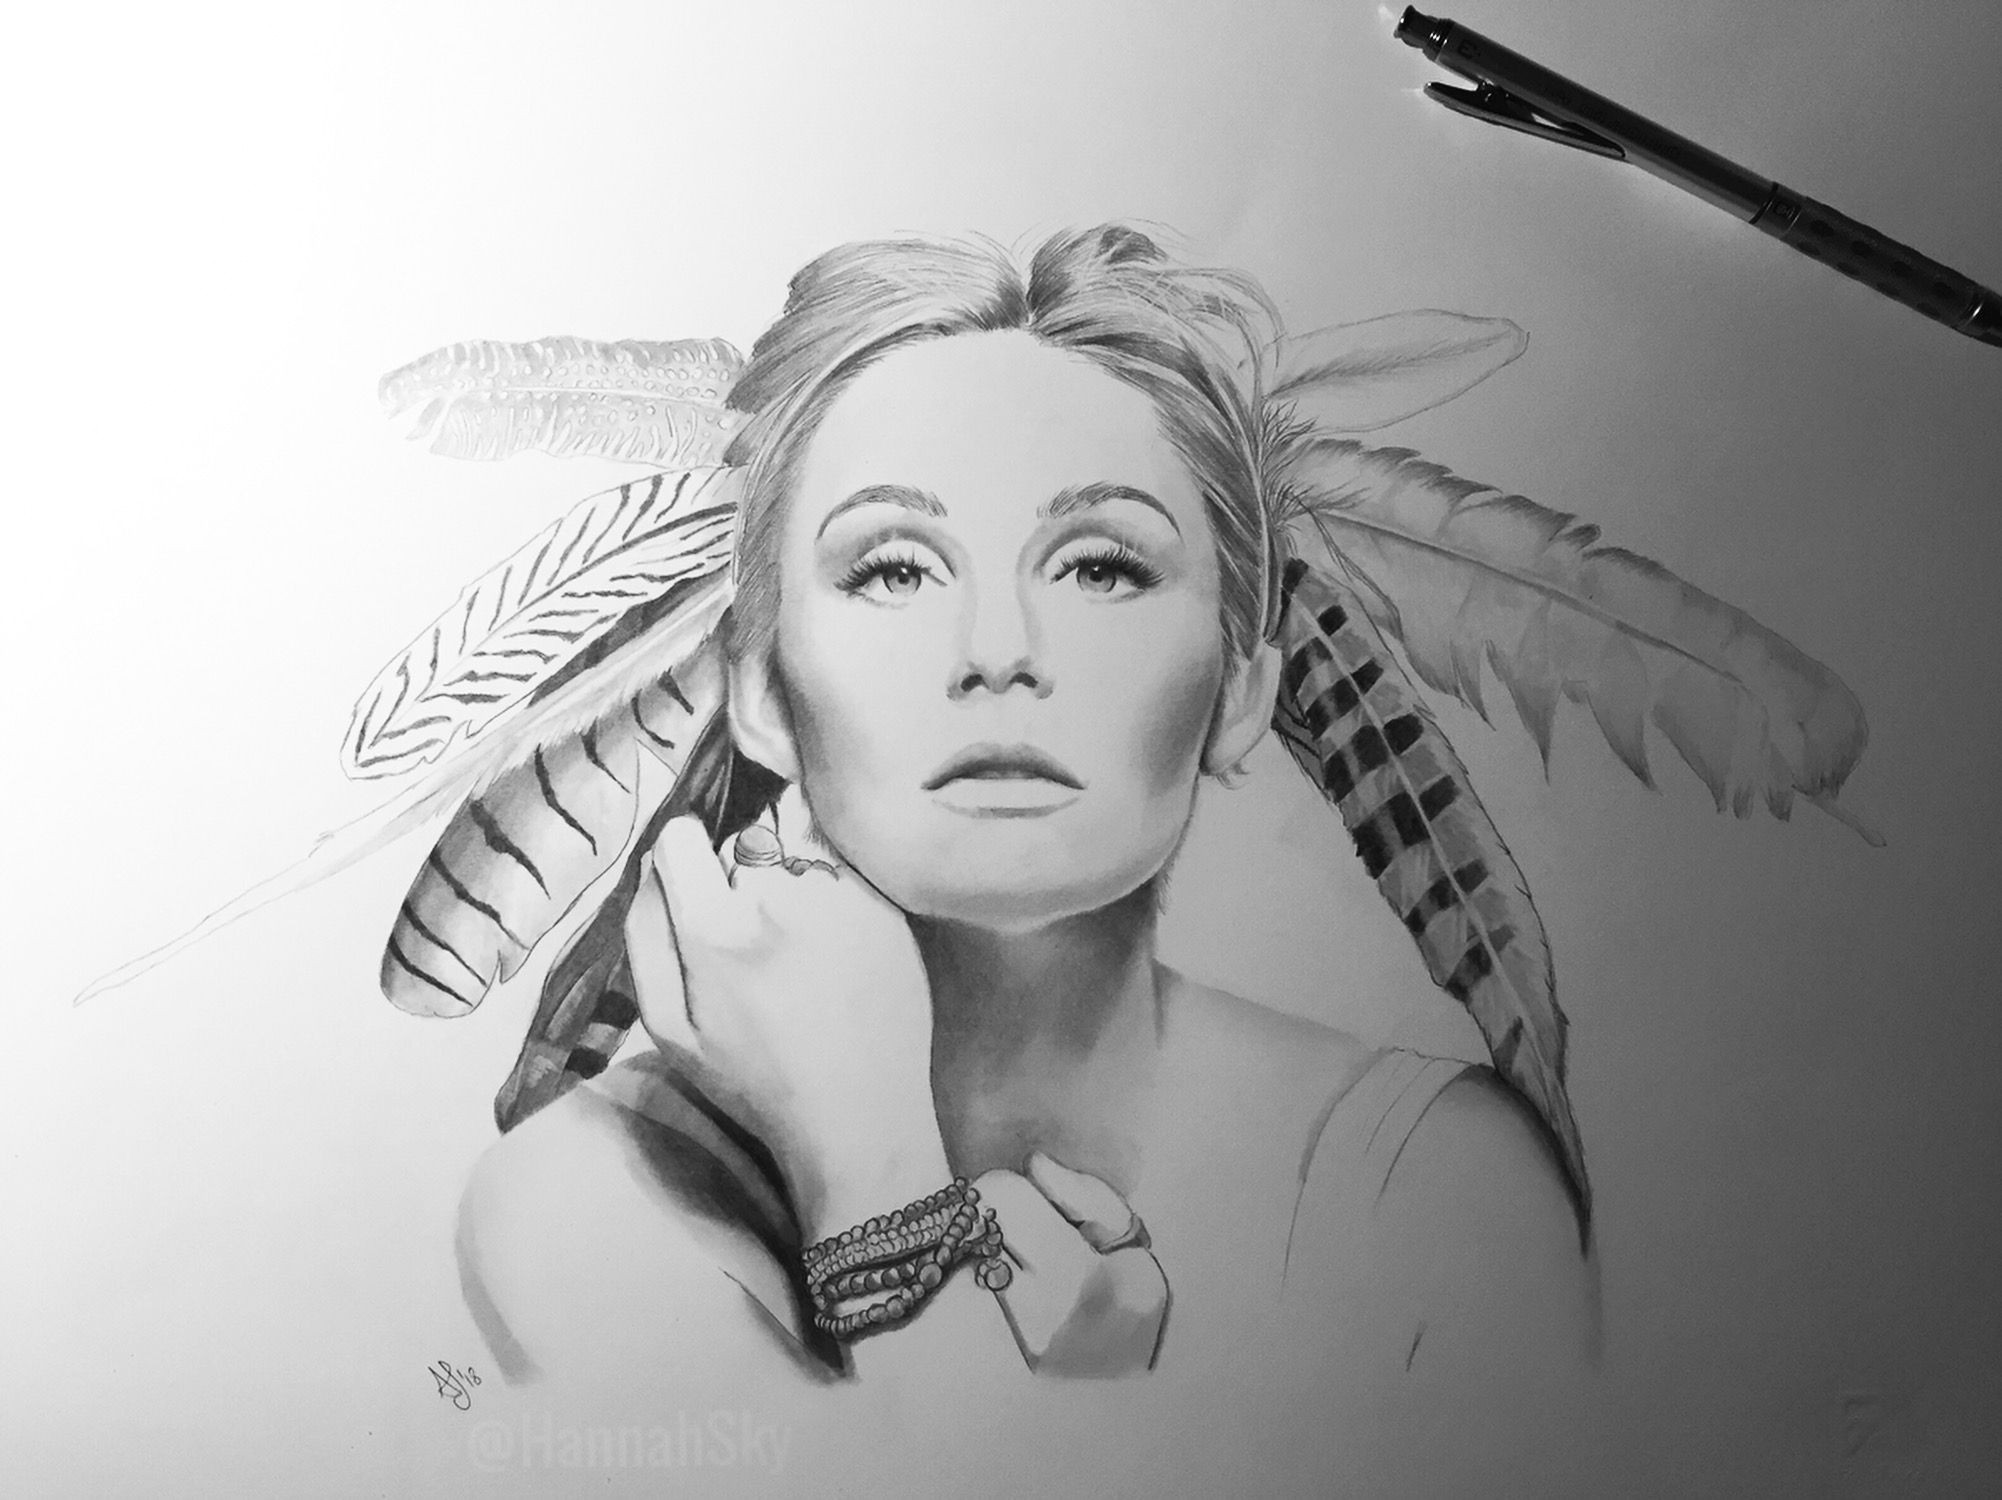 my friend asked me to draw a portrait of singer clare bowen so i did if